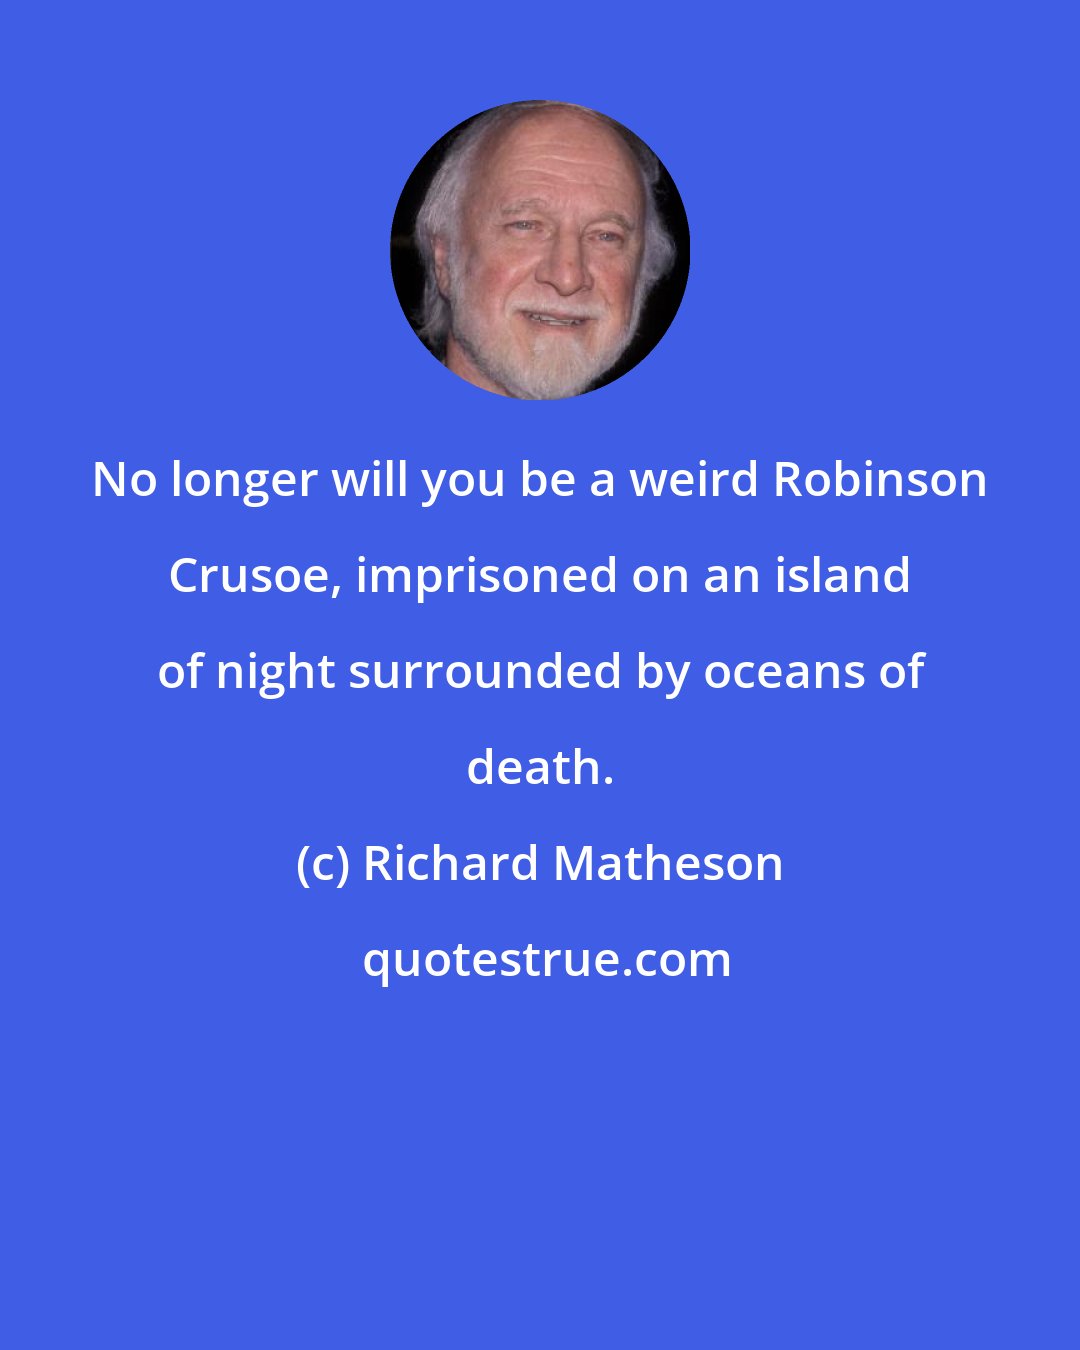 Richard Matheson: No longer will you be a weird Robinson Crusoe, imprisoned on an island of night surrounded by oceans of death.